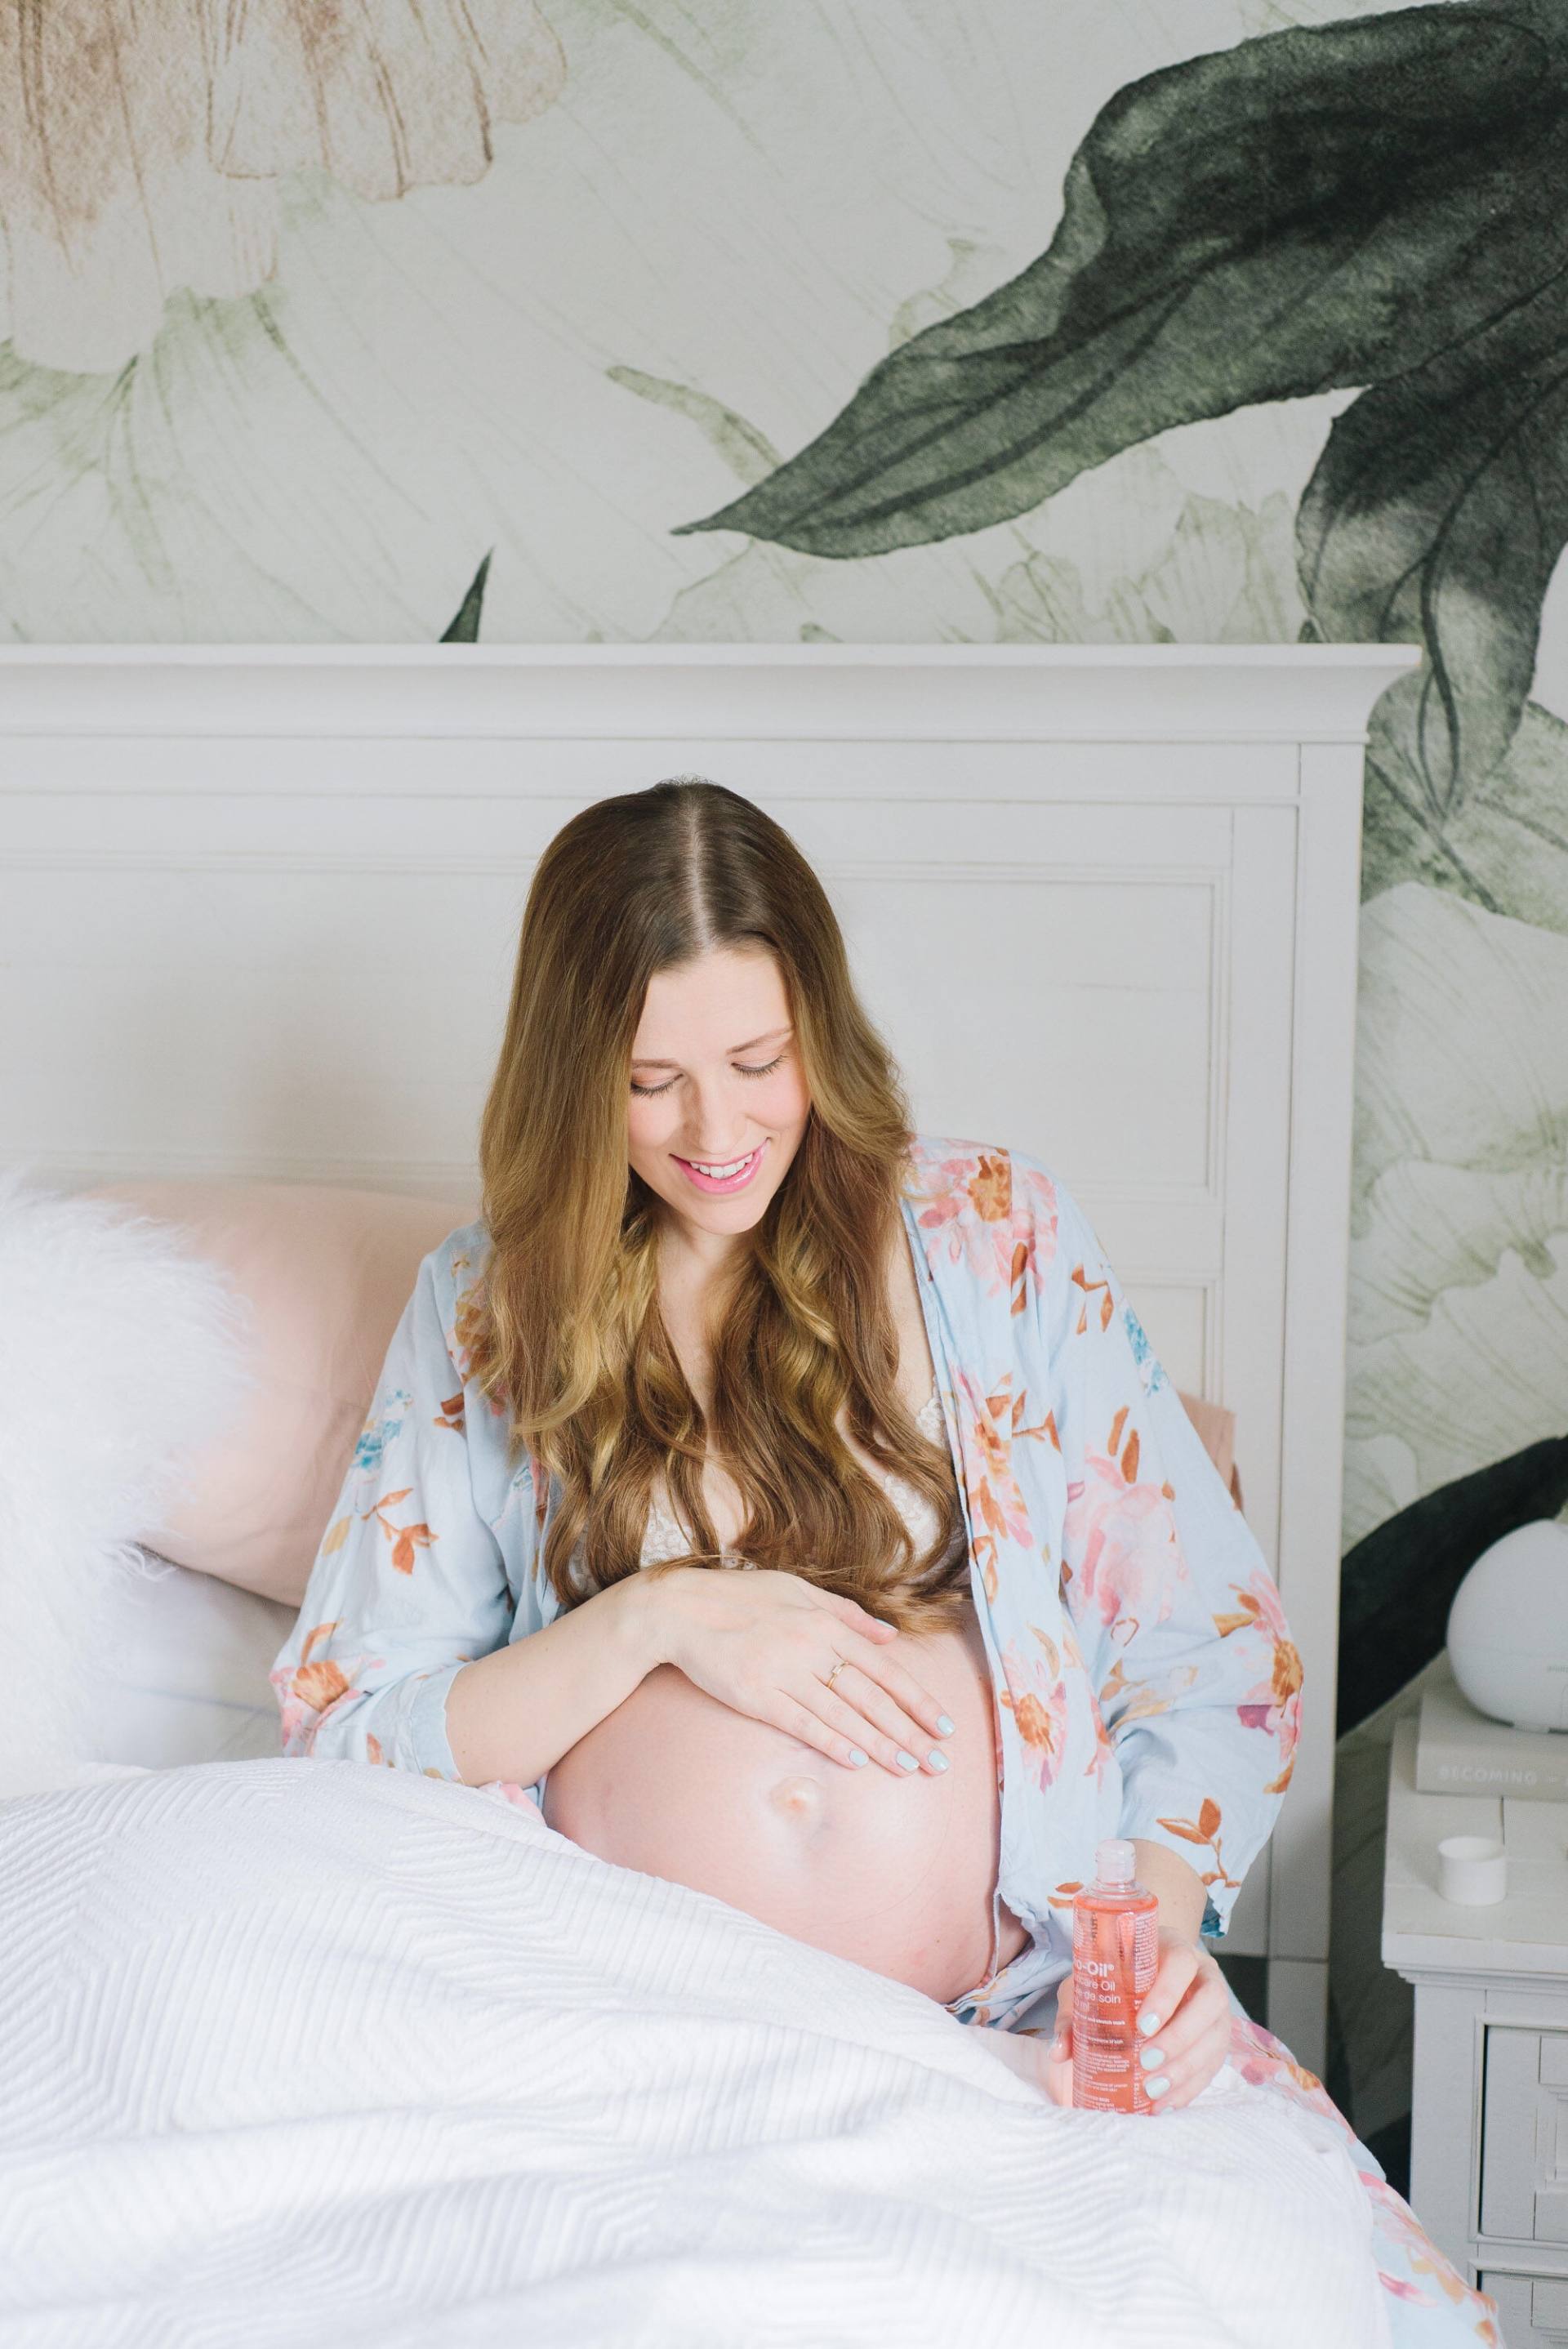 My Experience Using Bio-Oil During Pregnancy